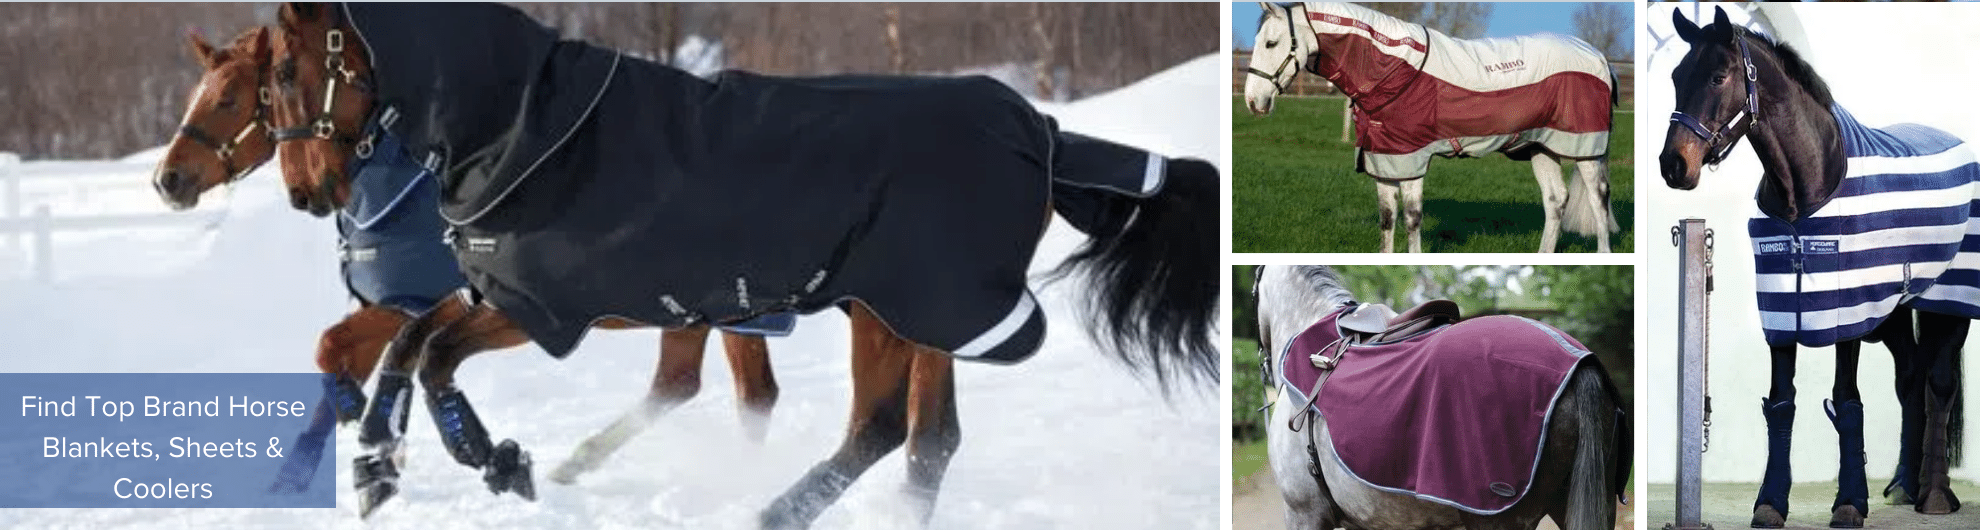 Shop for Top Brand Horse Blankets, Sheets & Coolers